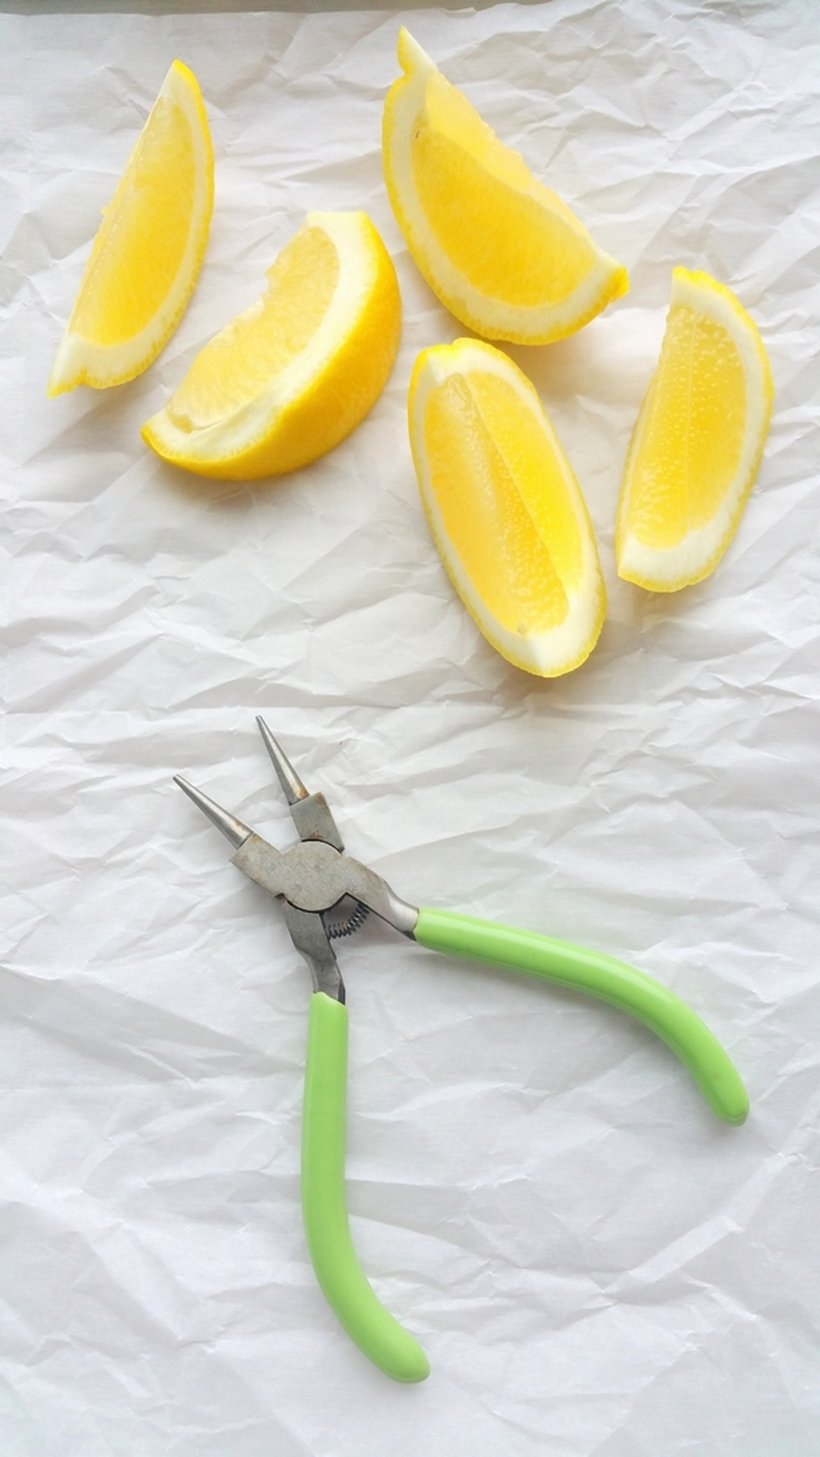 Sliced lemons with a pair of needle-tipped pliers.